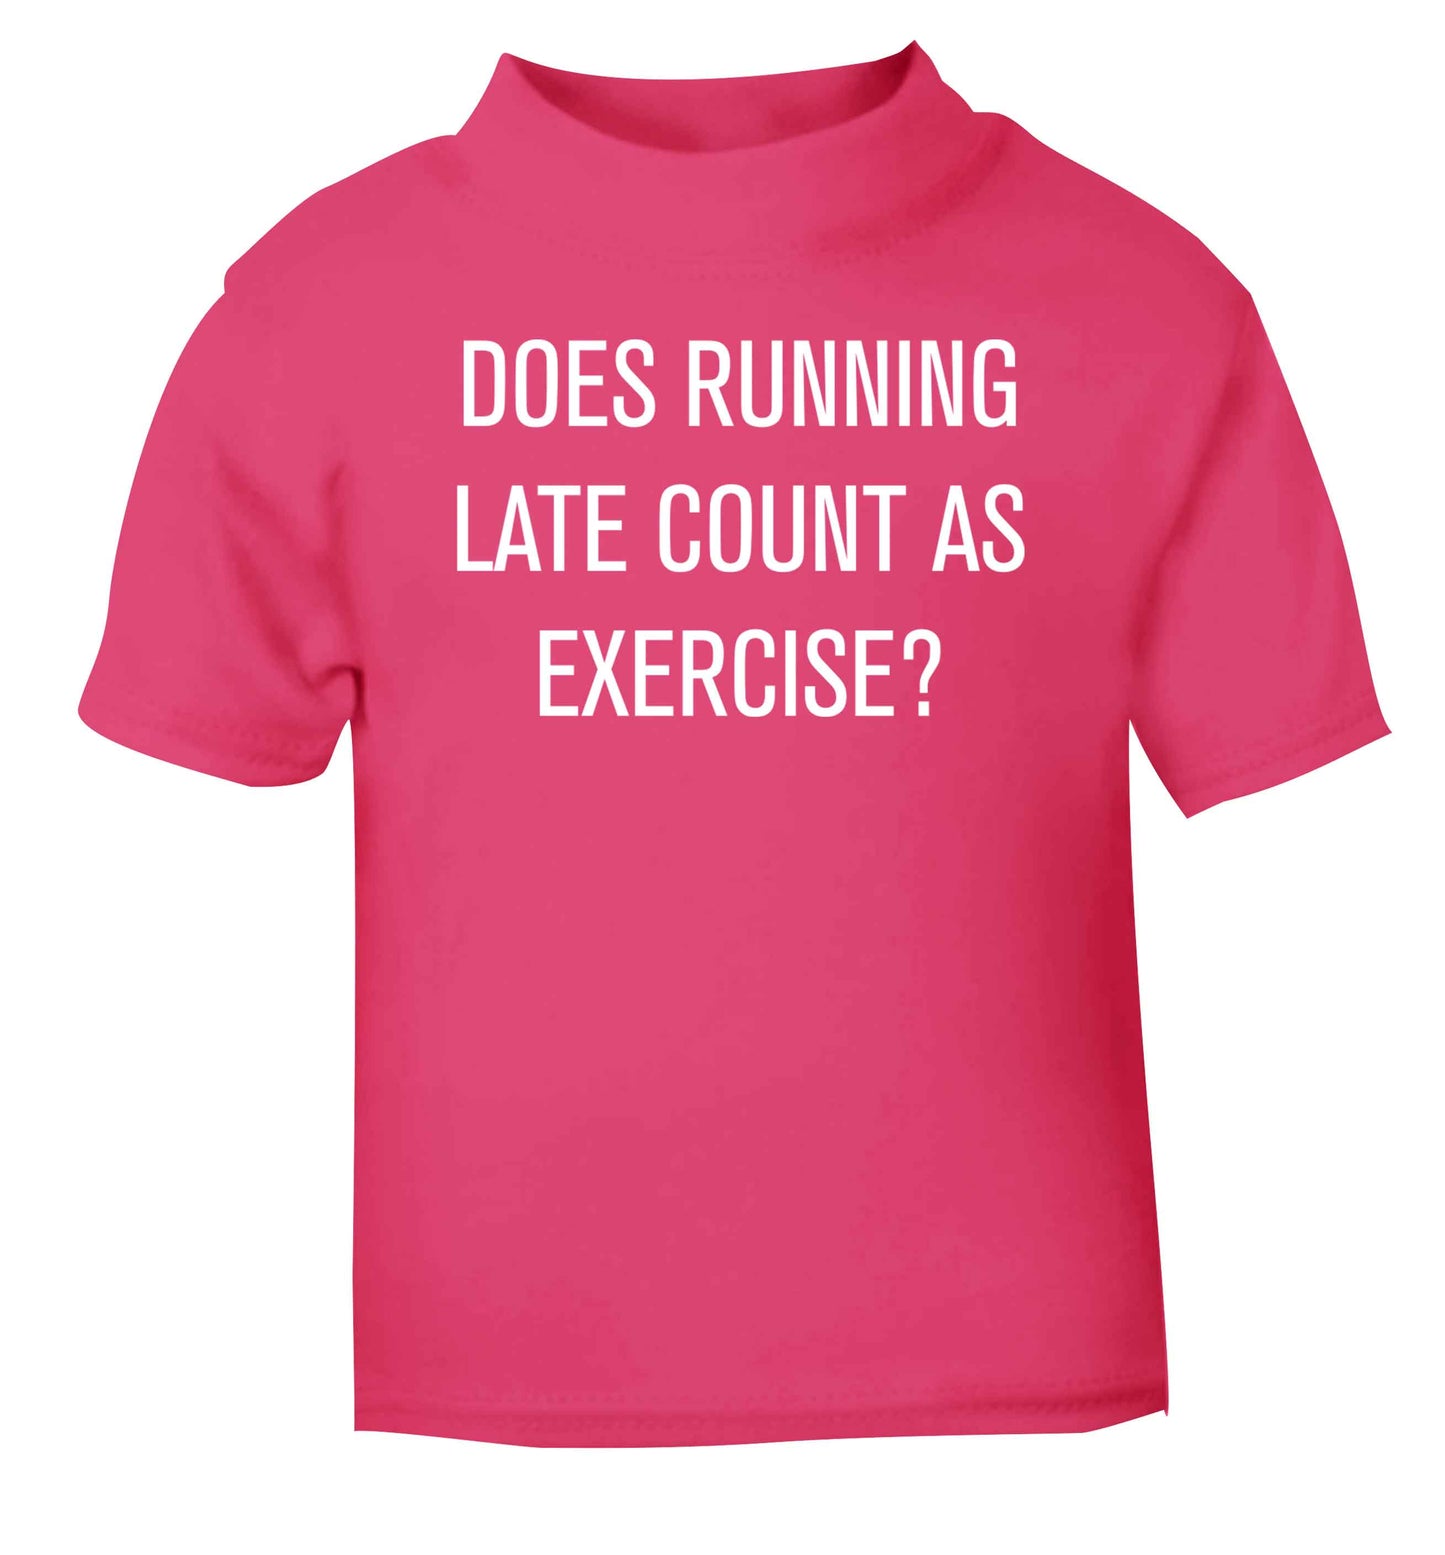 Does running late count as exercise? pink baby toddler Tshirt 2 Years